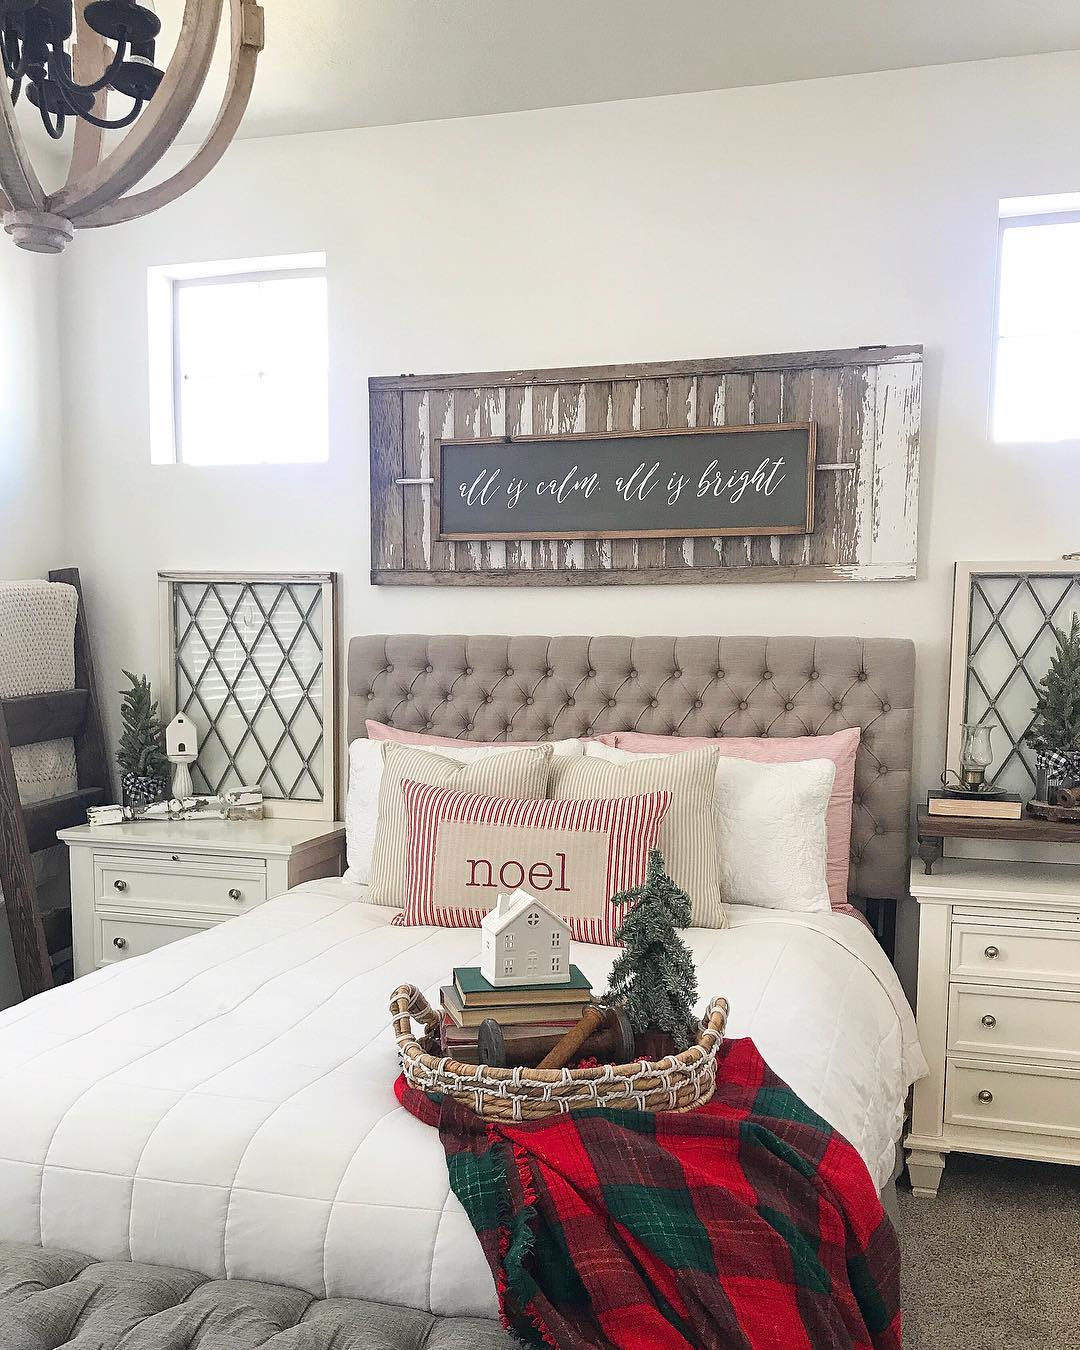 Guest Room Adorned with Christmas Blankets, Pillows, and Other Decorations. Photo by Instagram user @down_mulberry_lane